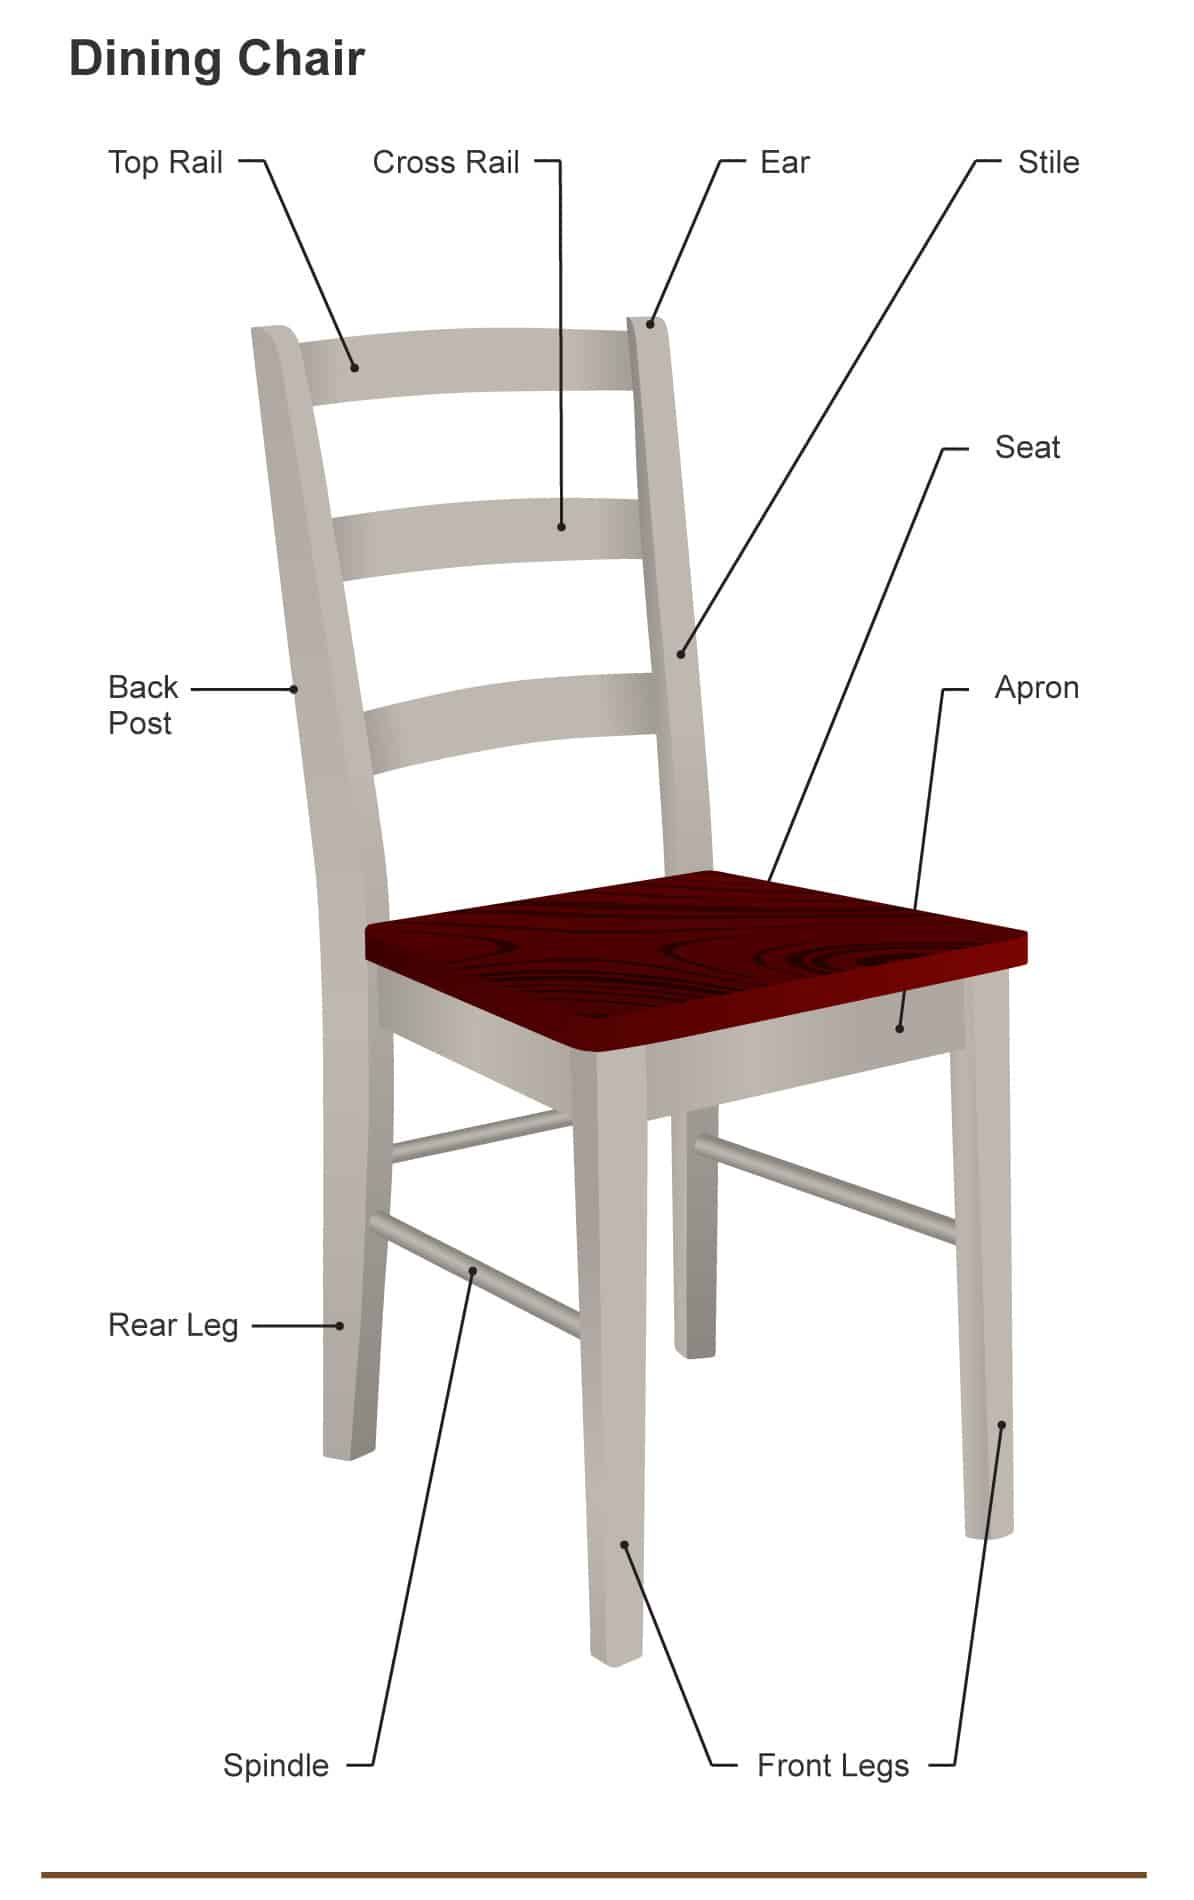 Different Chair Parts You Need to Learn